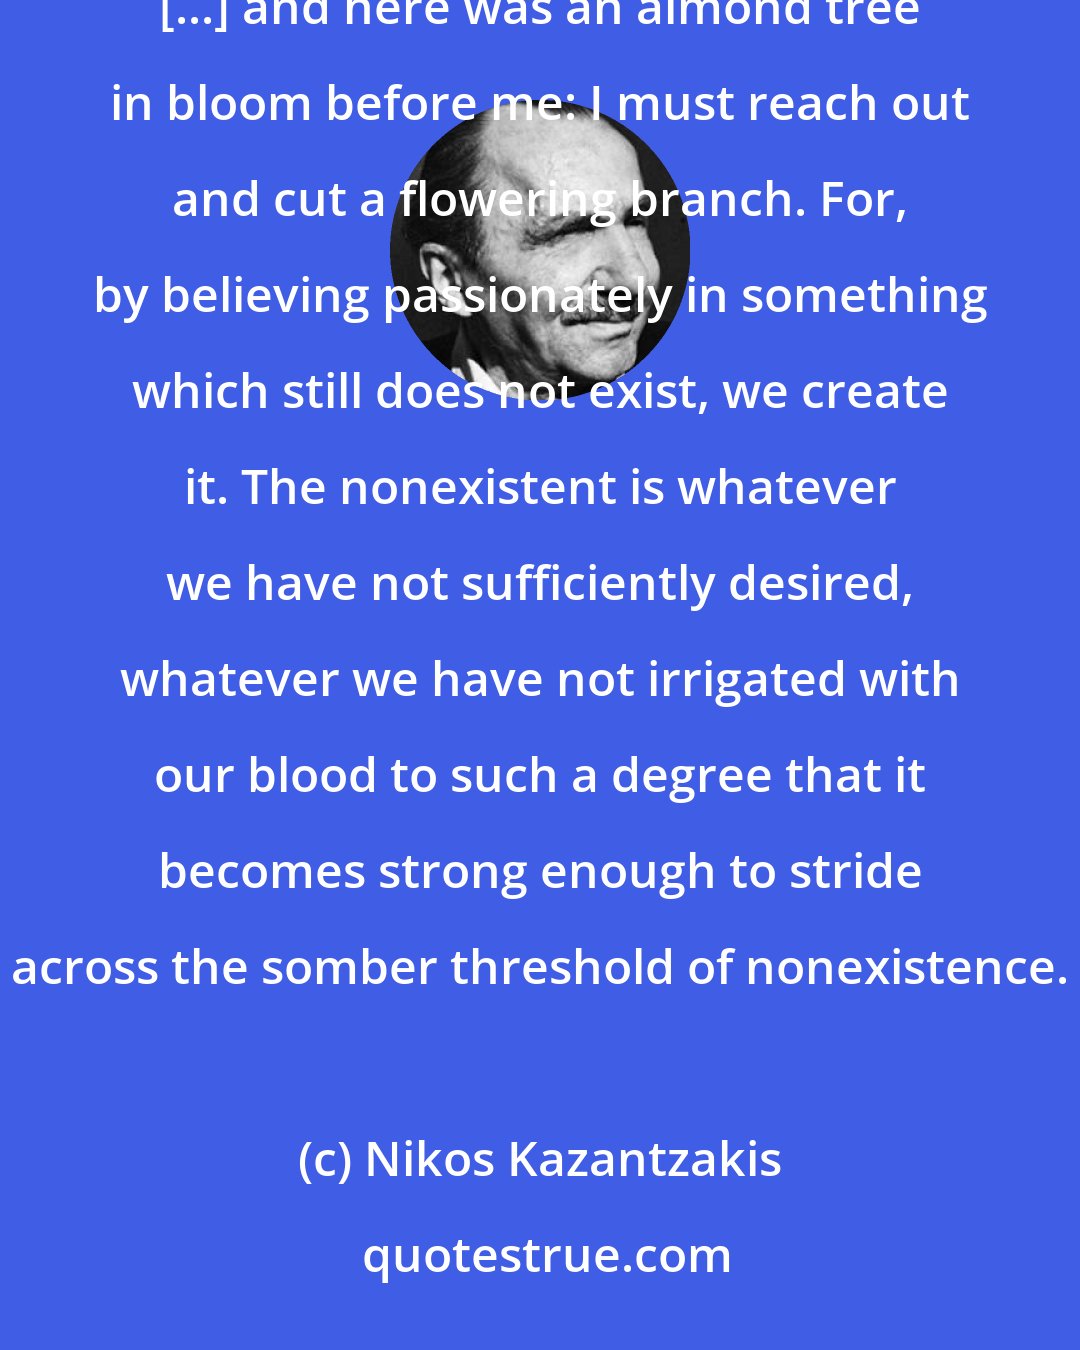 Nikos Kazantzakis: I heard the bells from the future churches, the children playing and laughing in the schoolyards [...] and here was an almond tree in bloom before me: I must reach out and cut a flowering branch. For, by believing passionately in something which still does not exist, we create it. The nonexistent is whatever we have not sufficiently desired, whatever we have not irrigated with our blood to such a degree that it becomes strong enough to stride across the somber threshold of nonexistence.